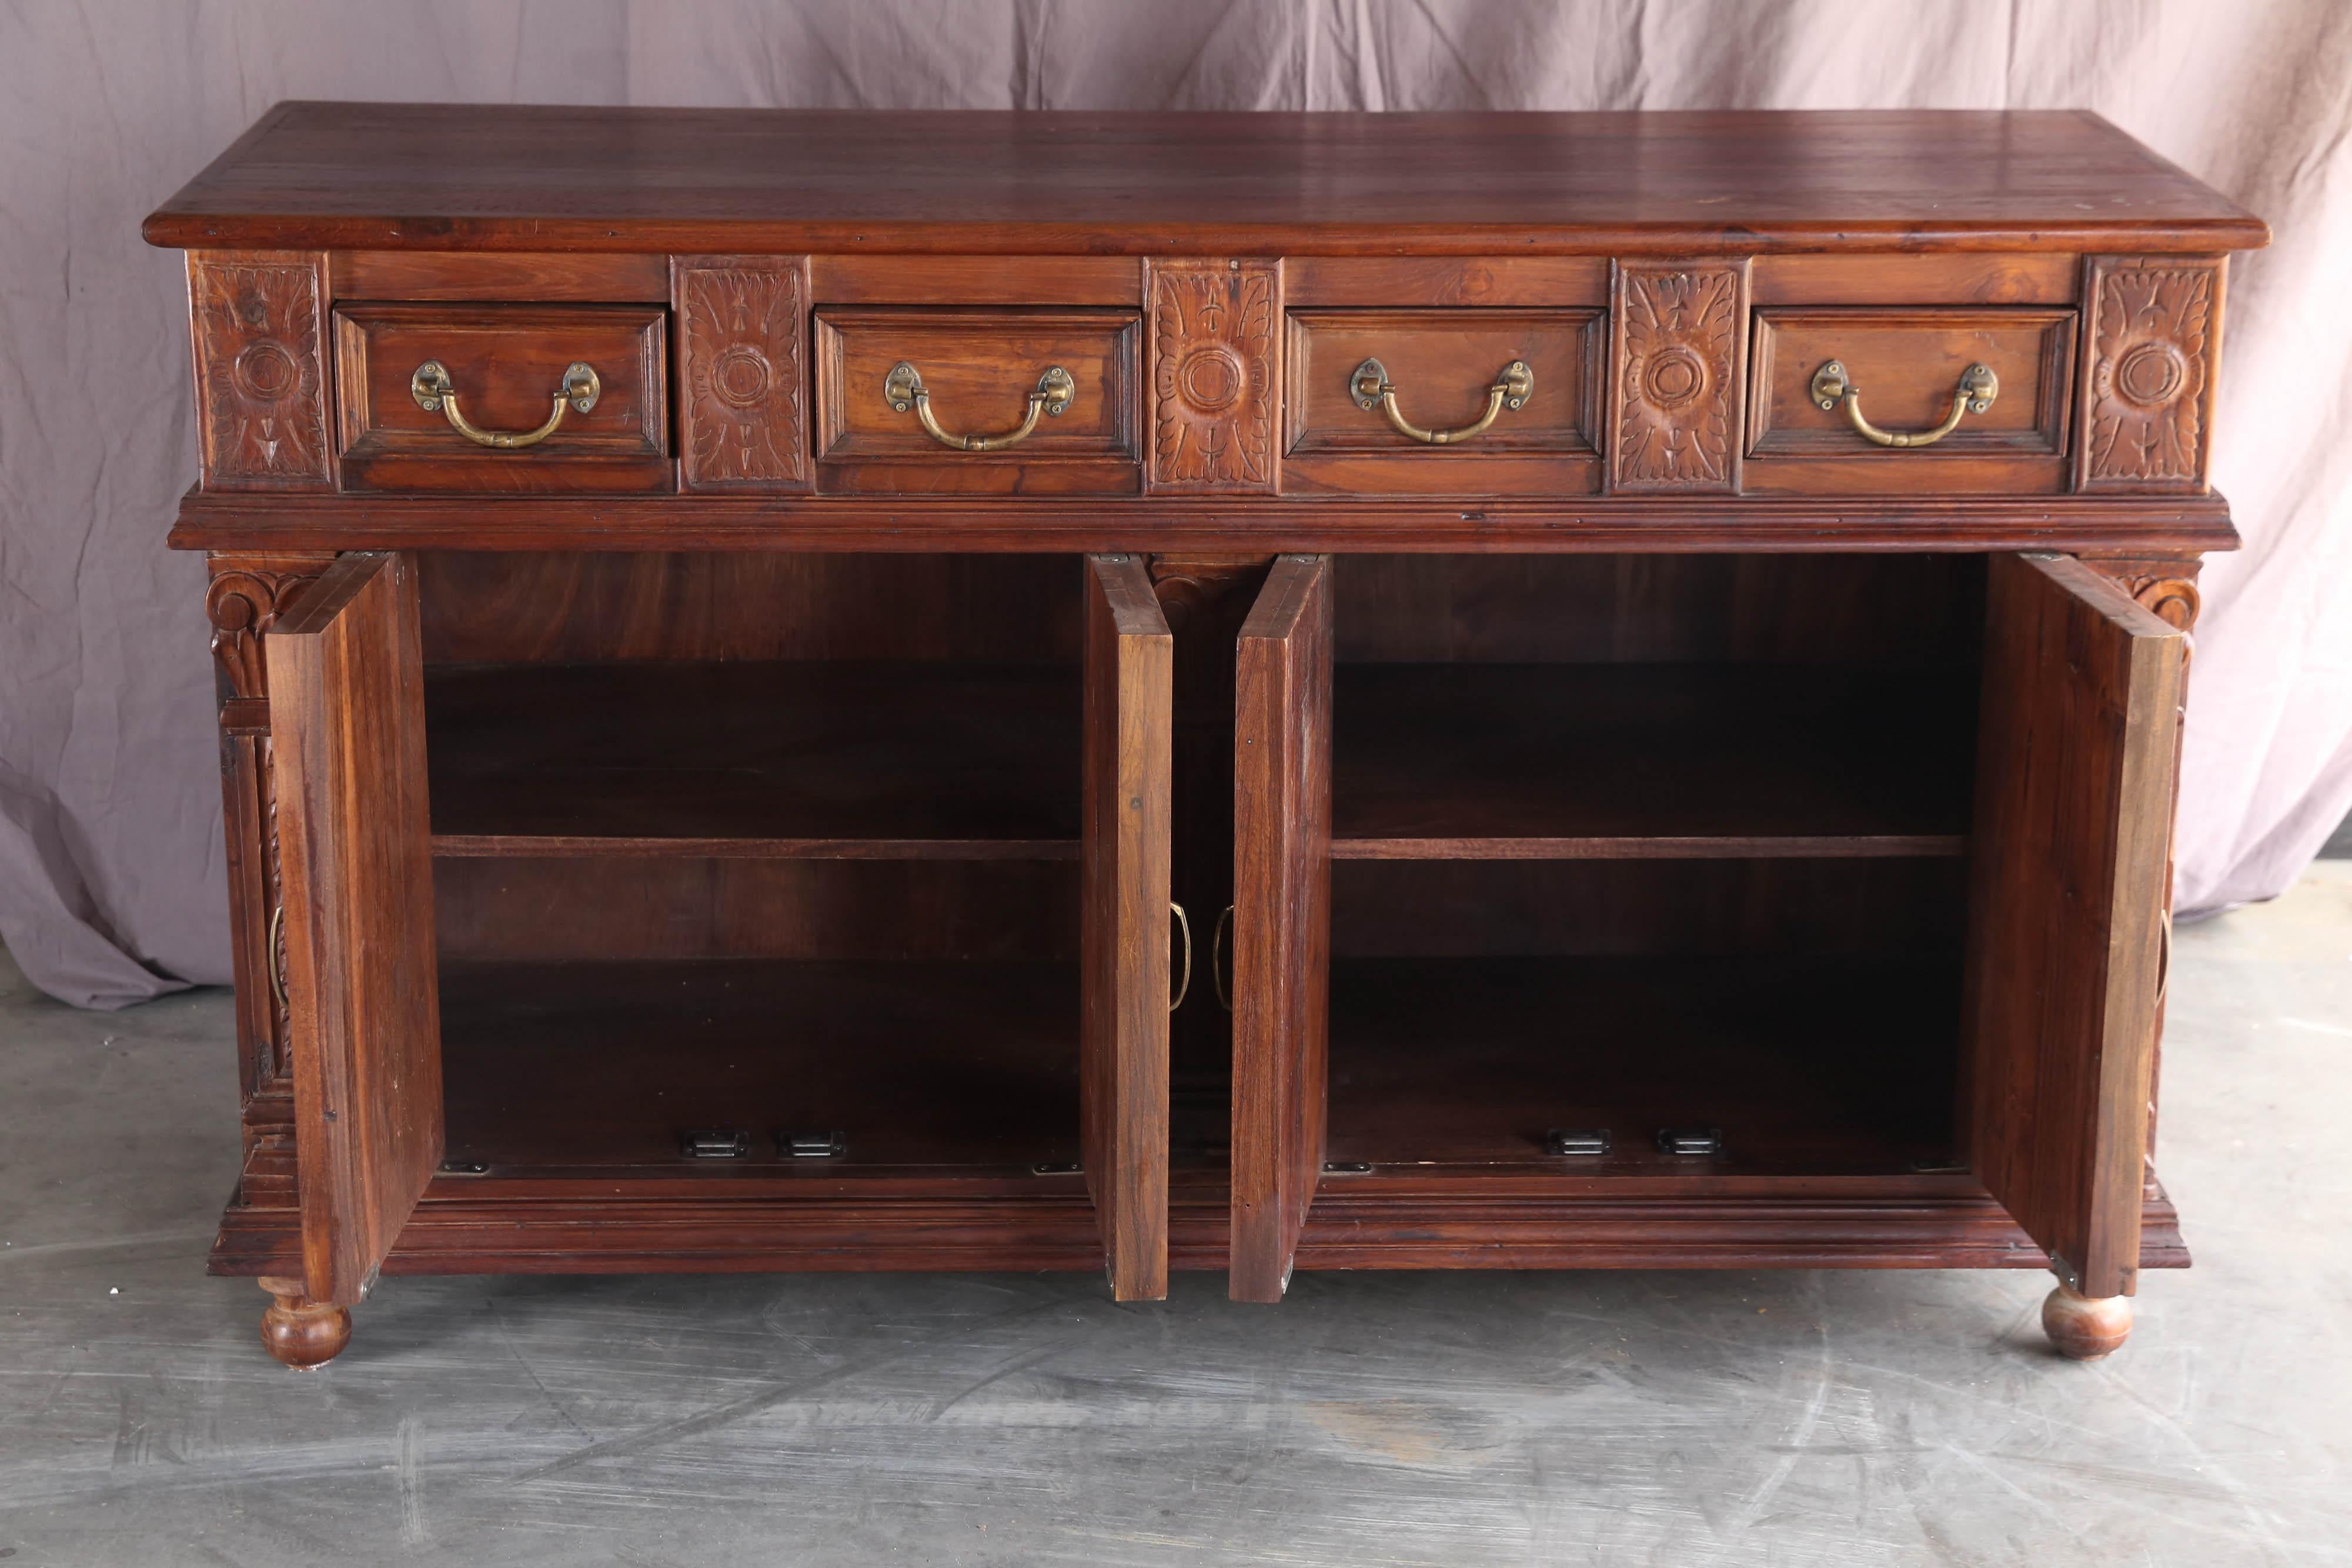 Hand-Crafted Early 20th Century Solid Teak Wood French Colonial Carved Entry Hall Credenza